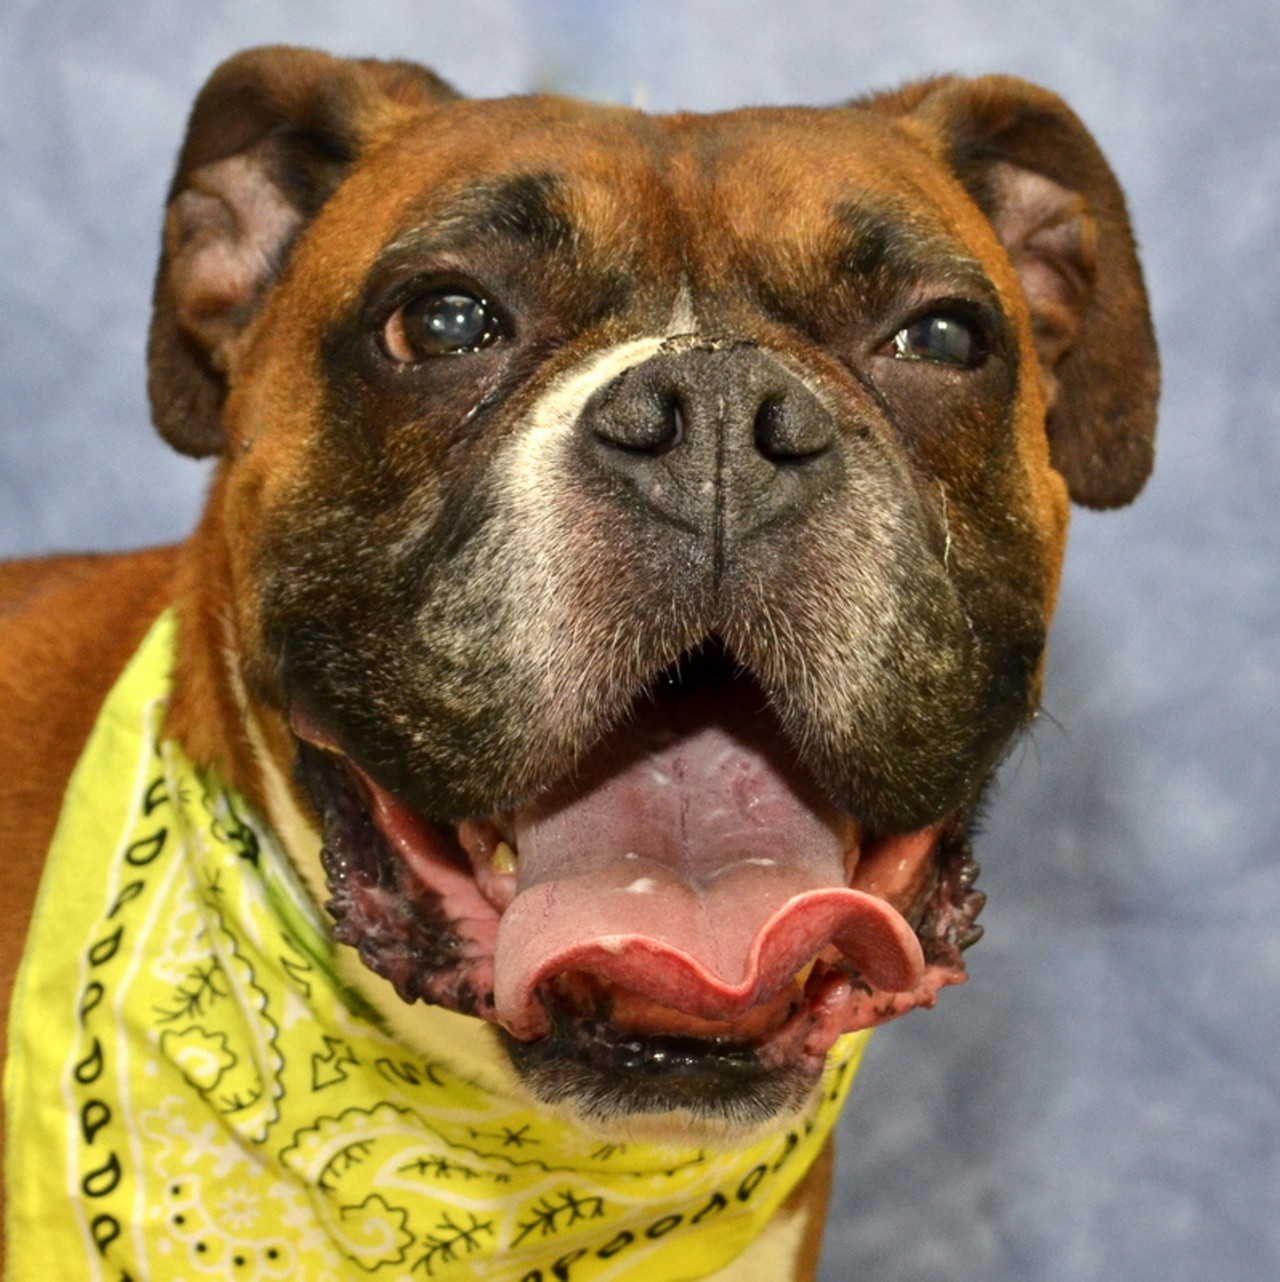 NAME: Apollo
GENDER: Male
BREED: Boxer
AGE: 10 years
WEIGHT: 67 pounds
SPECIAL CONSIDERATIONS: May prefer to be your only dog
REASON I CAME TO MHS: Owner surrender
LOCATION: Berman Center for Animal Care in Westland
ID NUMBER: 864978